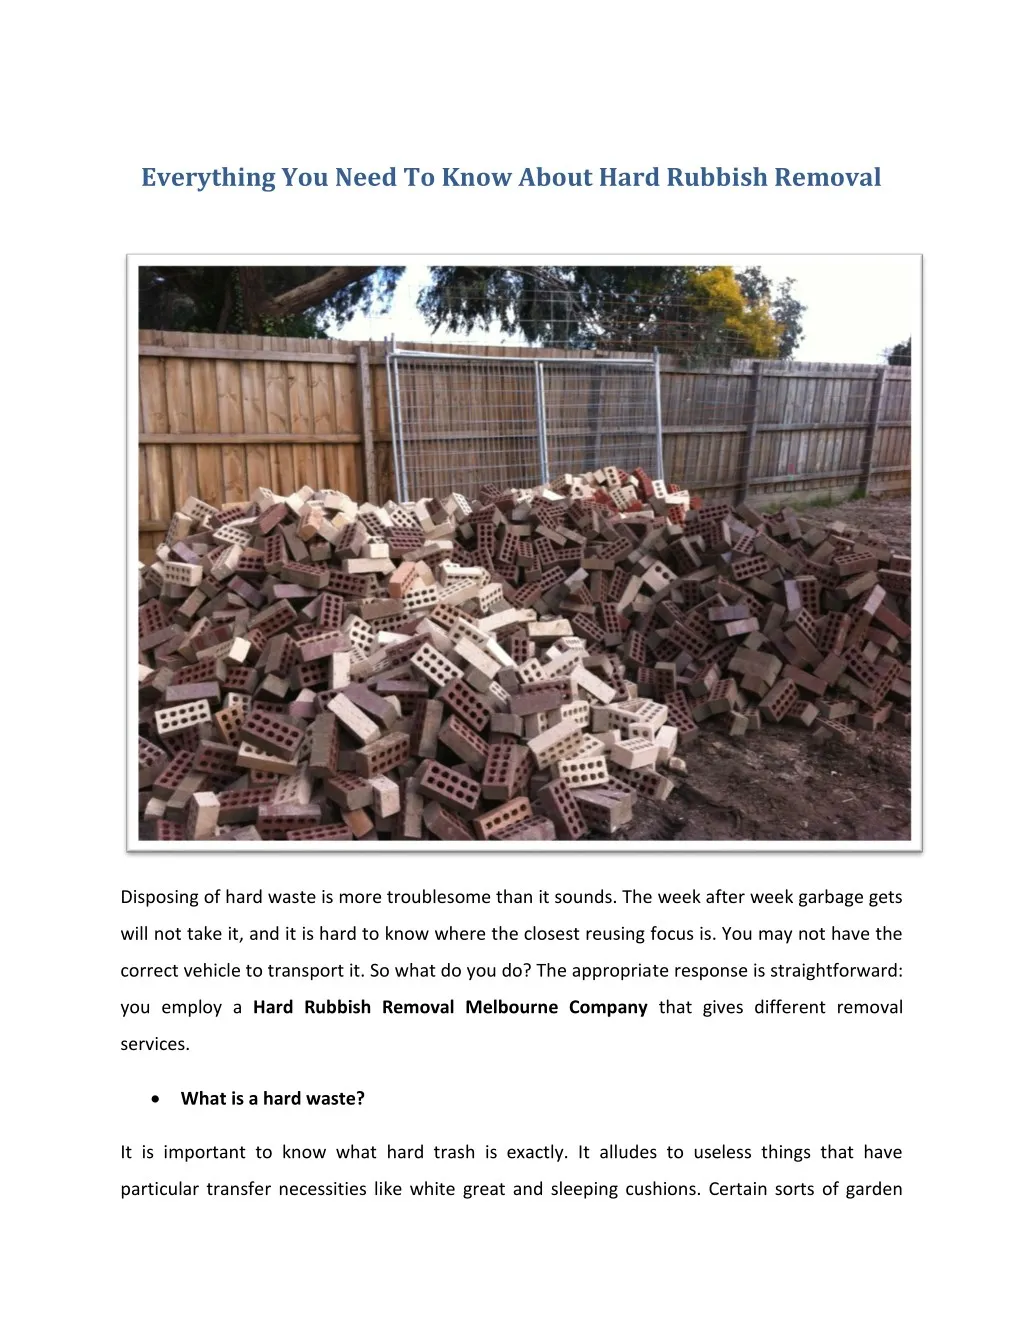 everything you need to know about hard rubbish